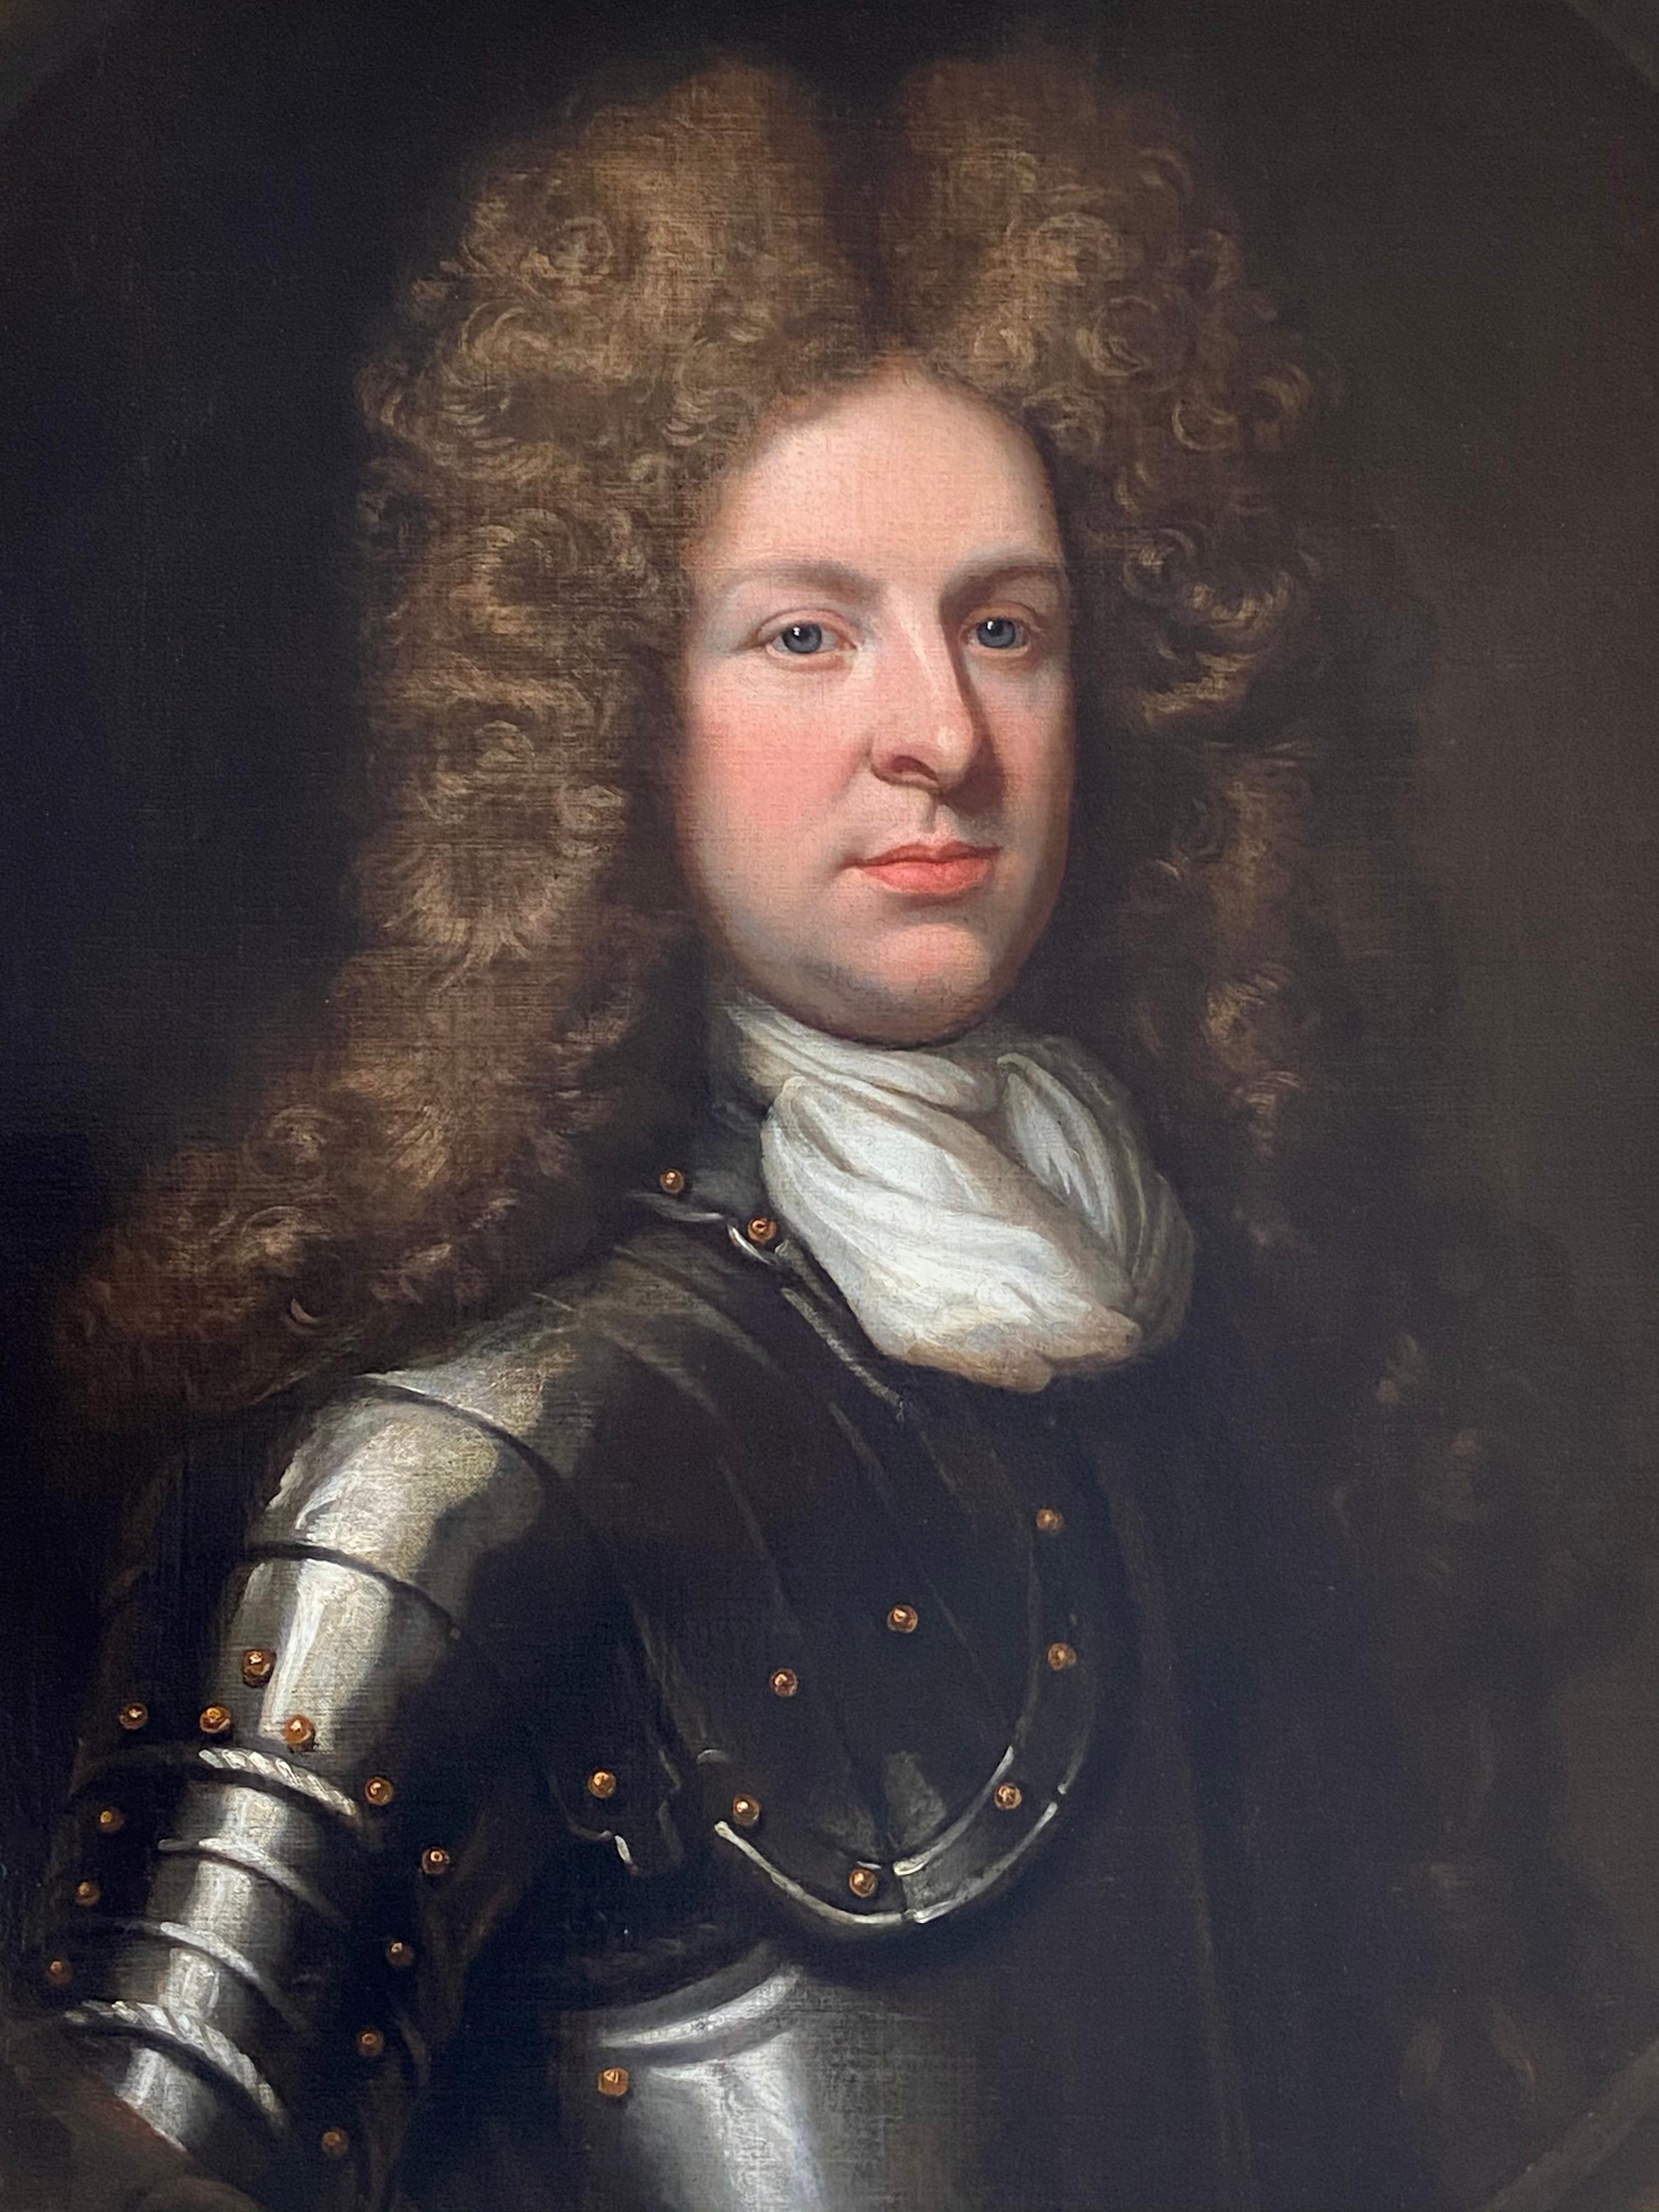 This fine chivalric portrait, dating to around c.1690, shows a young officer sporting a flamboyant powdered wig and silk cravat. Contrasted with these courtly accoutrements is the shining plate armour that covers and protects his body. It is clear